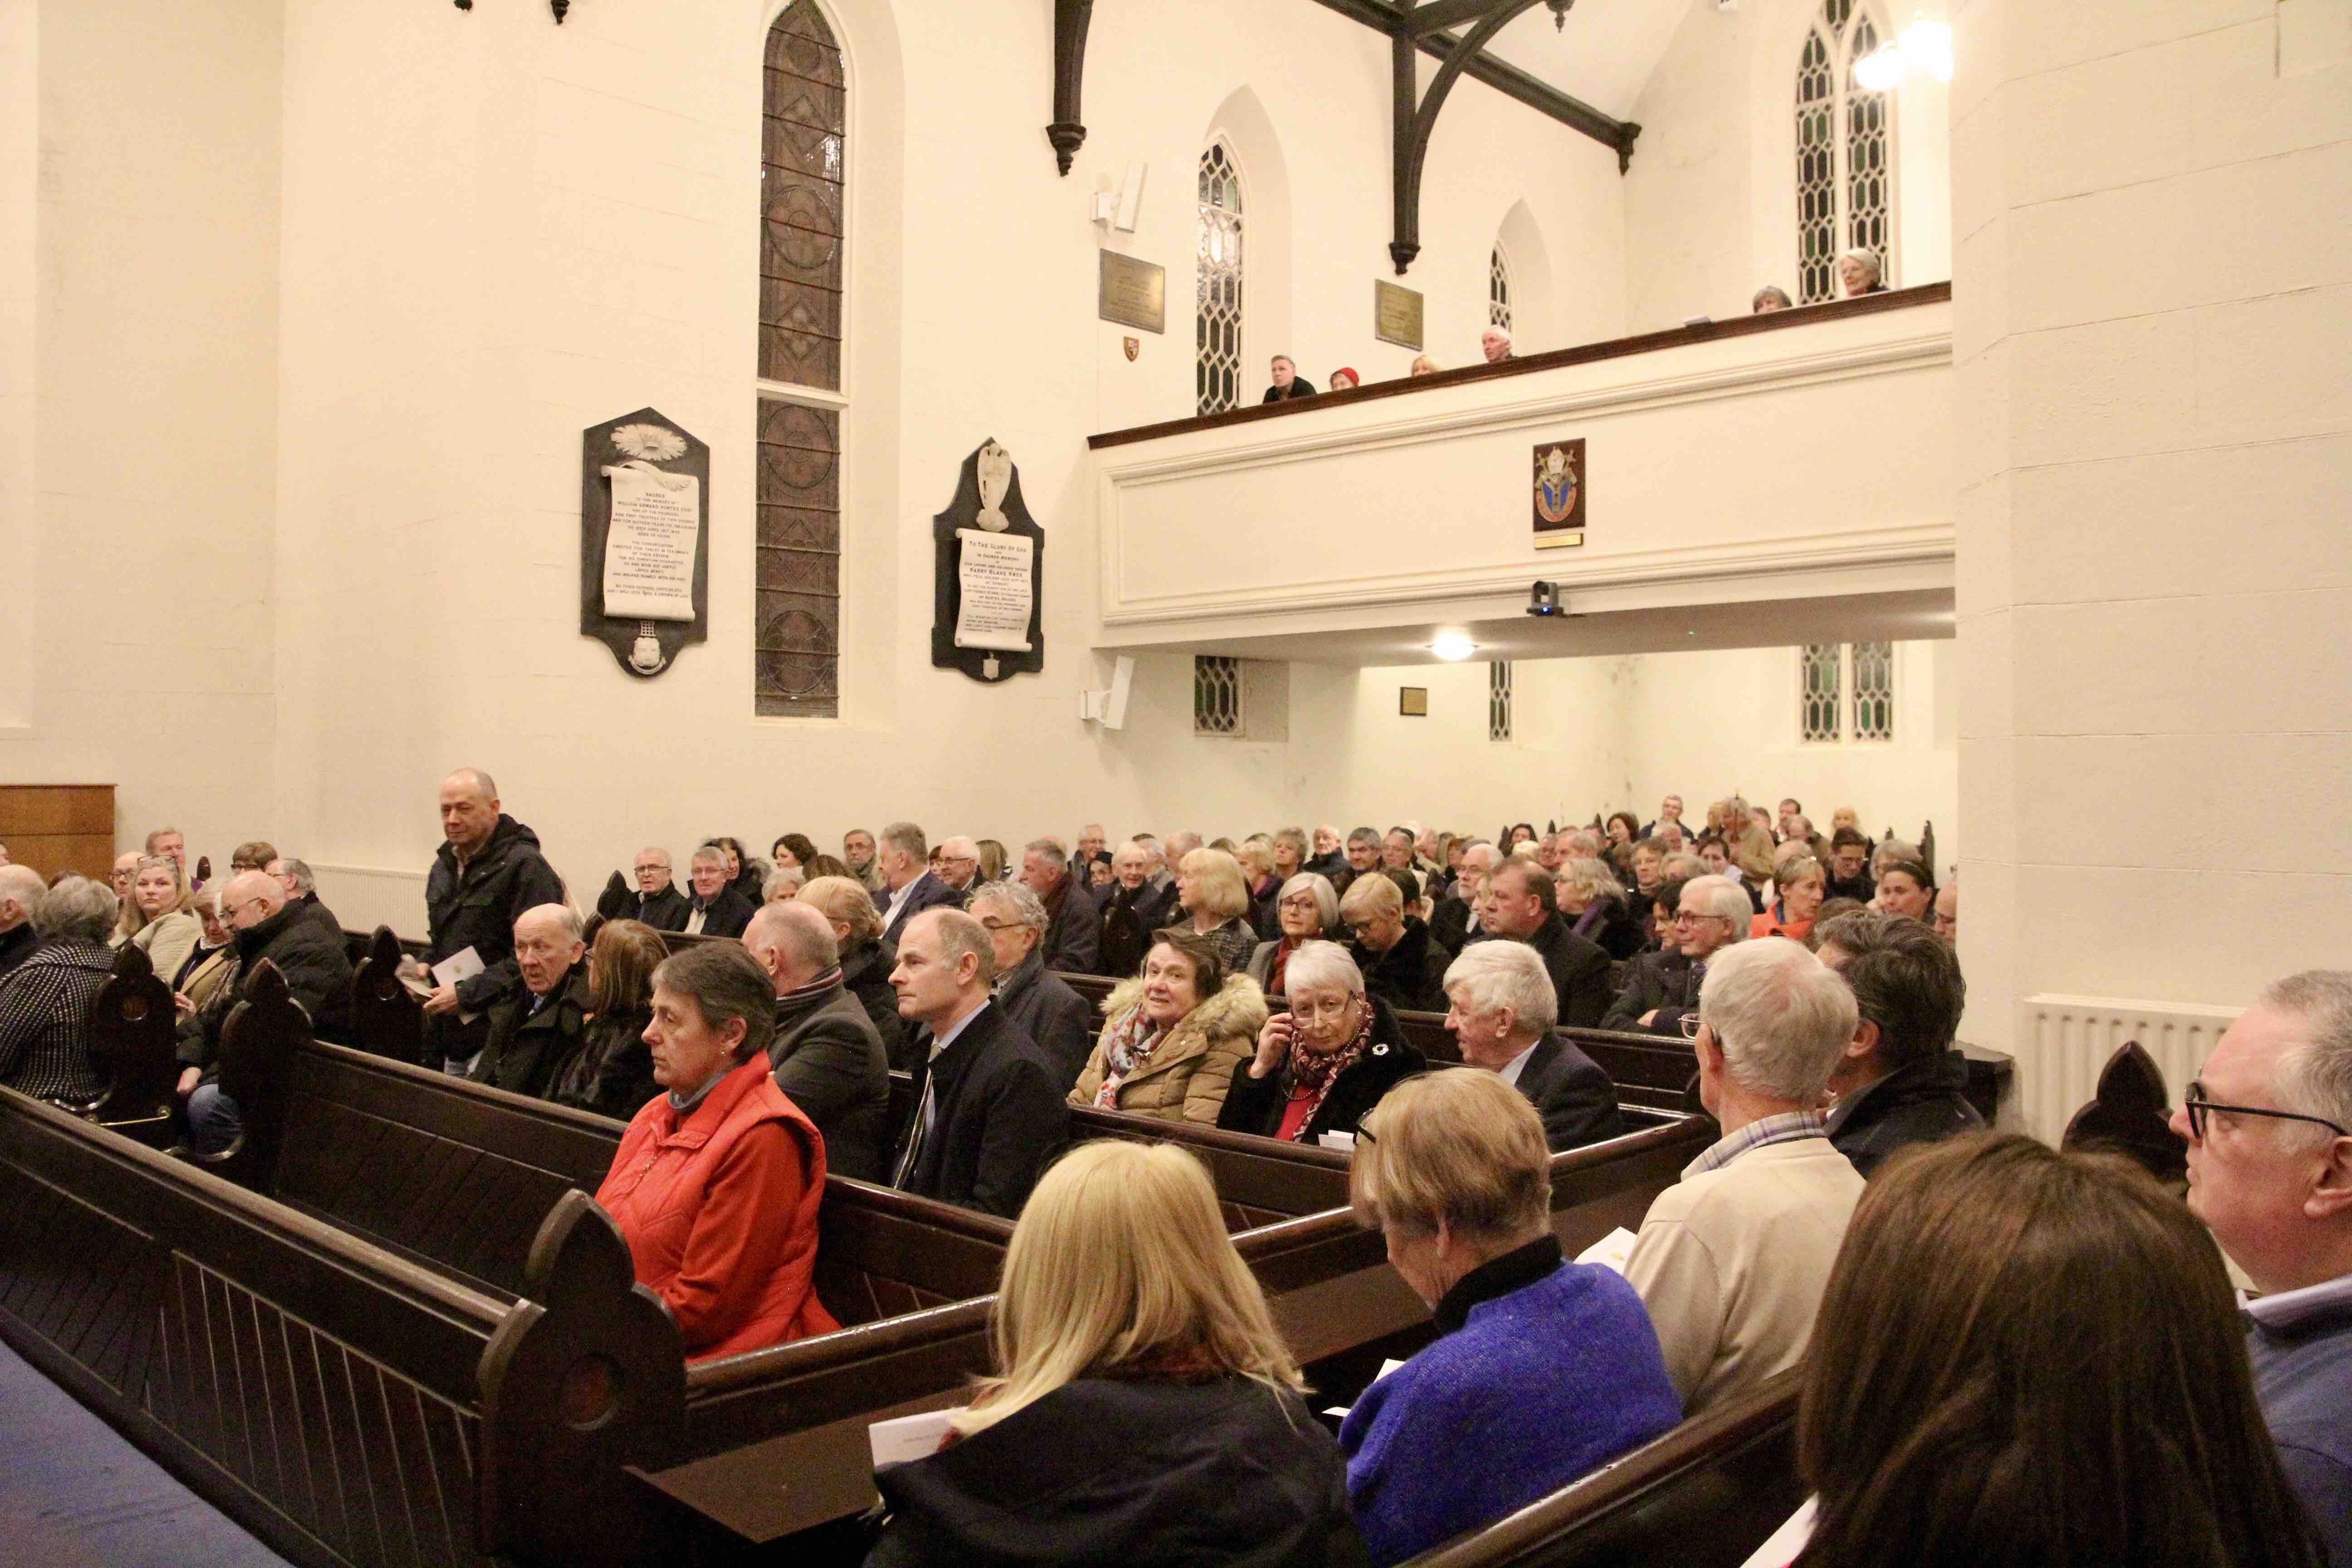 The congregation in St Patrick's Church, Dalkey.